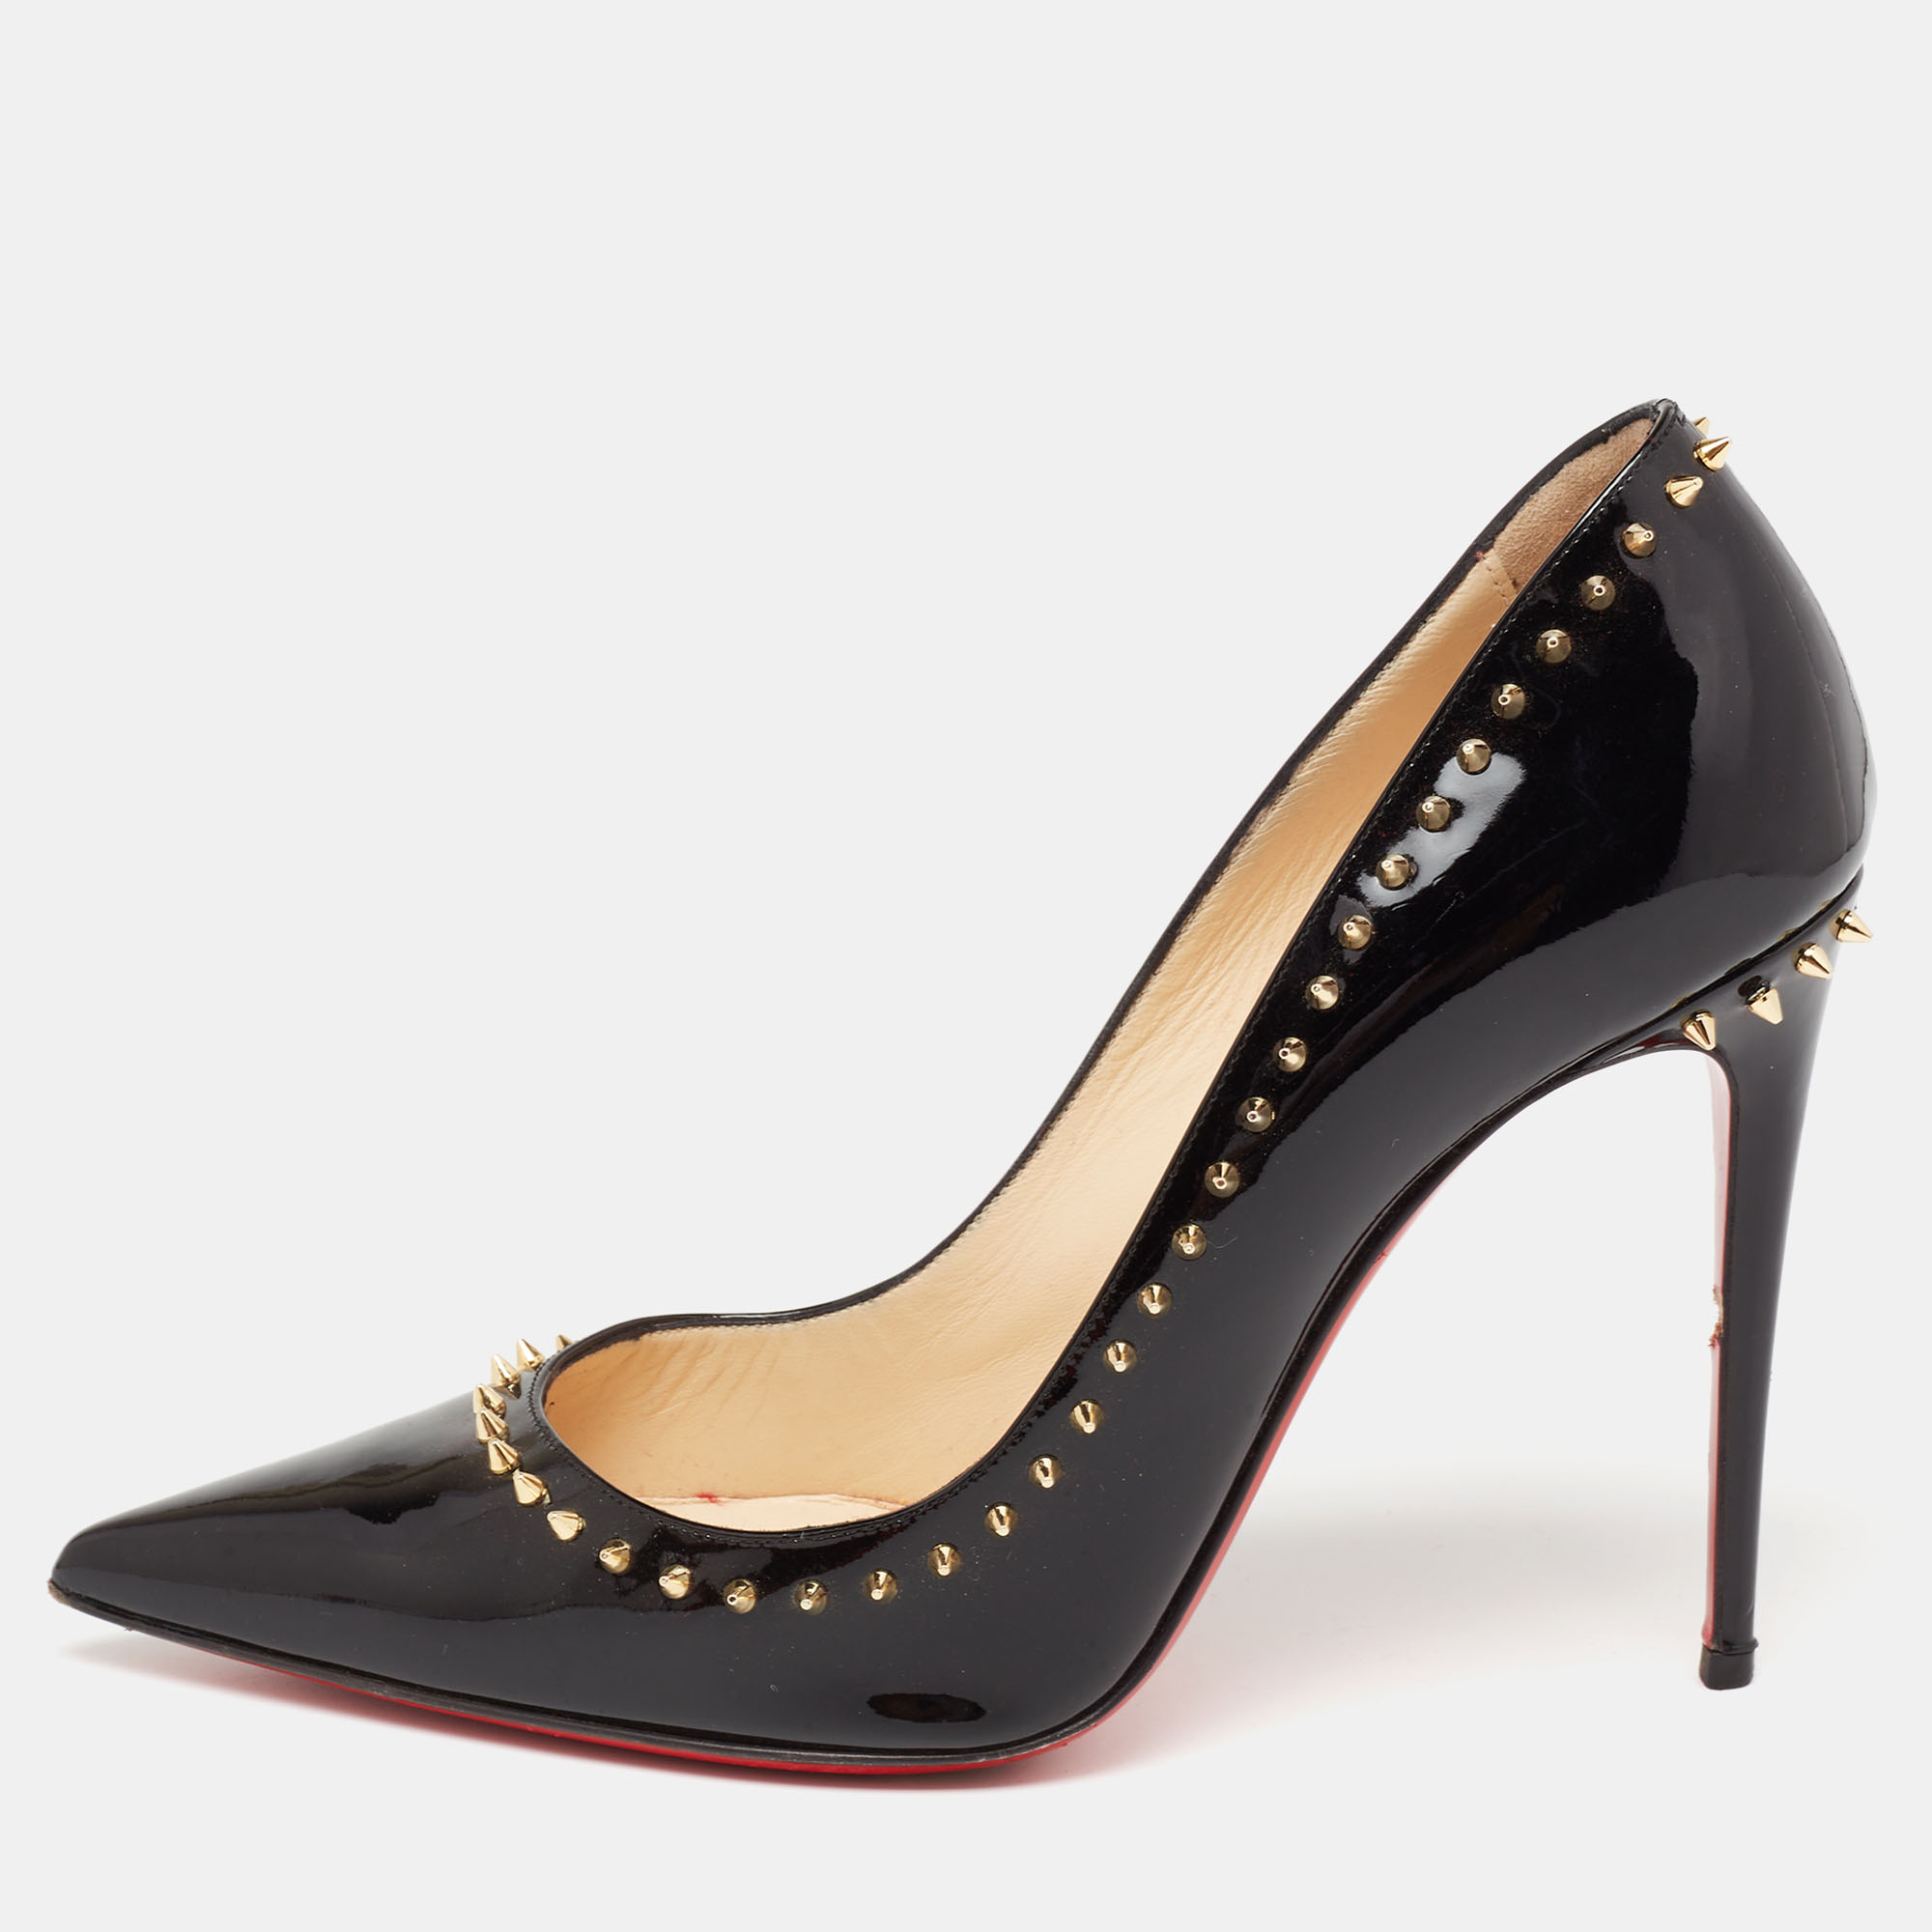 Pre-owned Christian Louboutin Black Patent Leather Anjalina Pumps Size 37.5